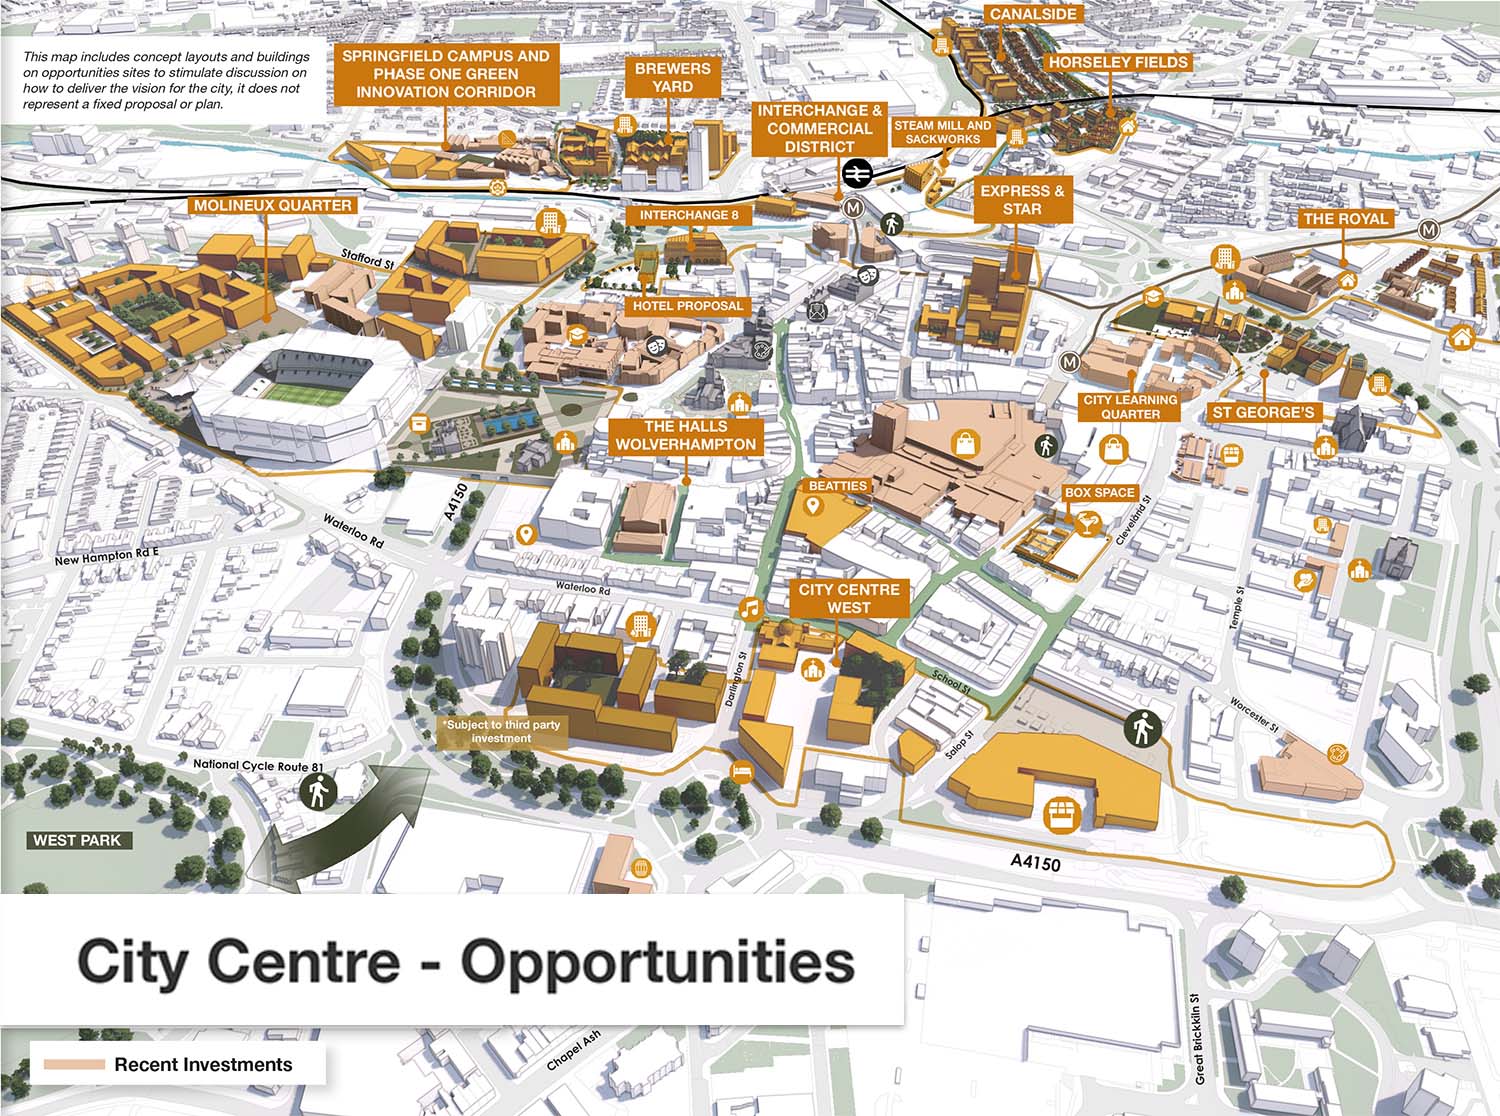 A map showing city centre investment opportunities.